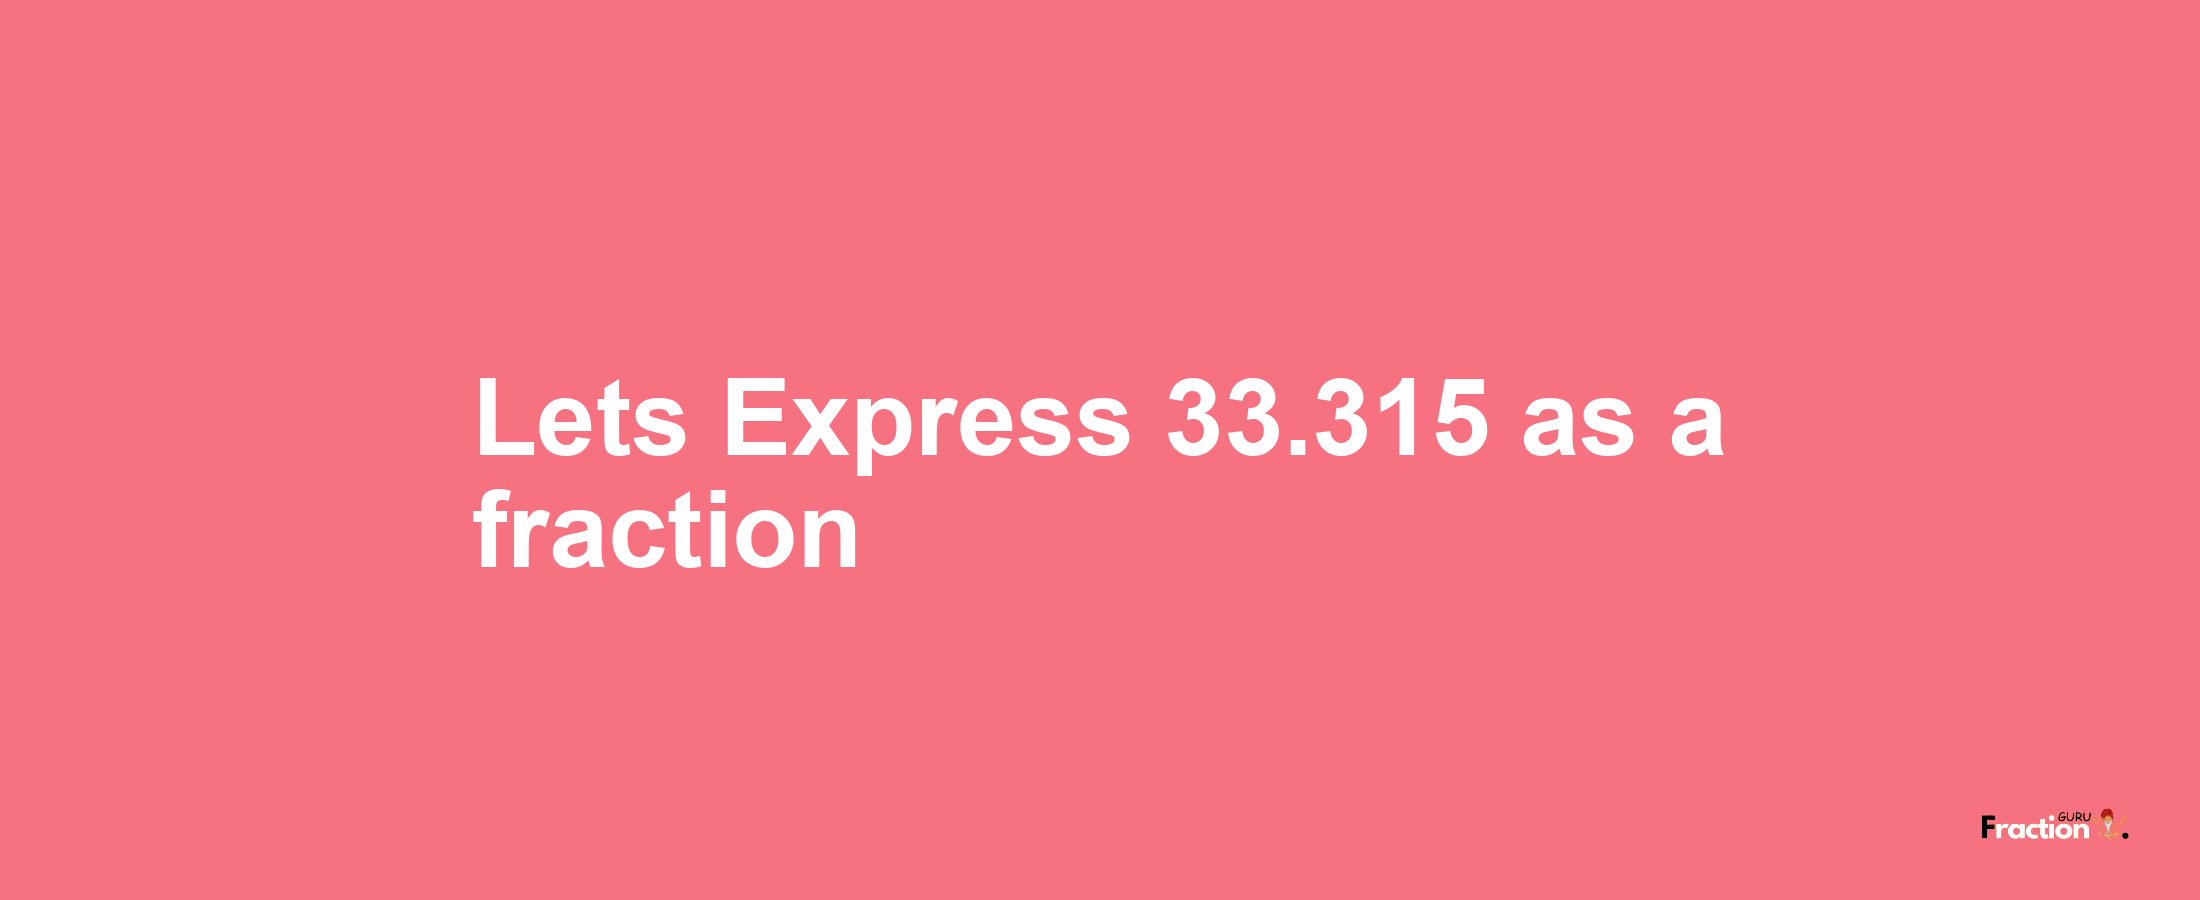 Lets Express 33.315 as afraction